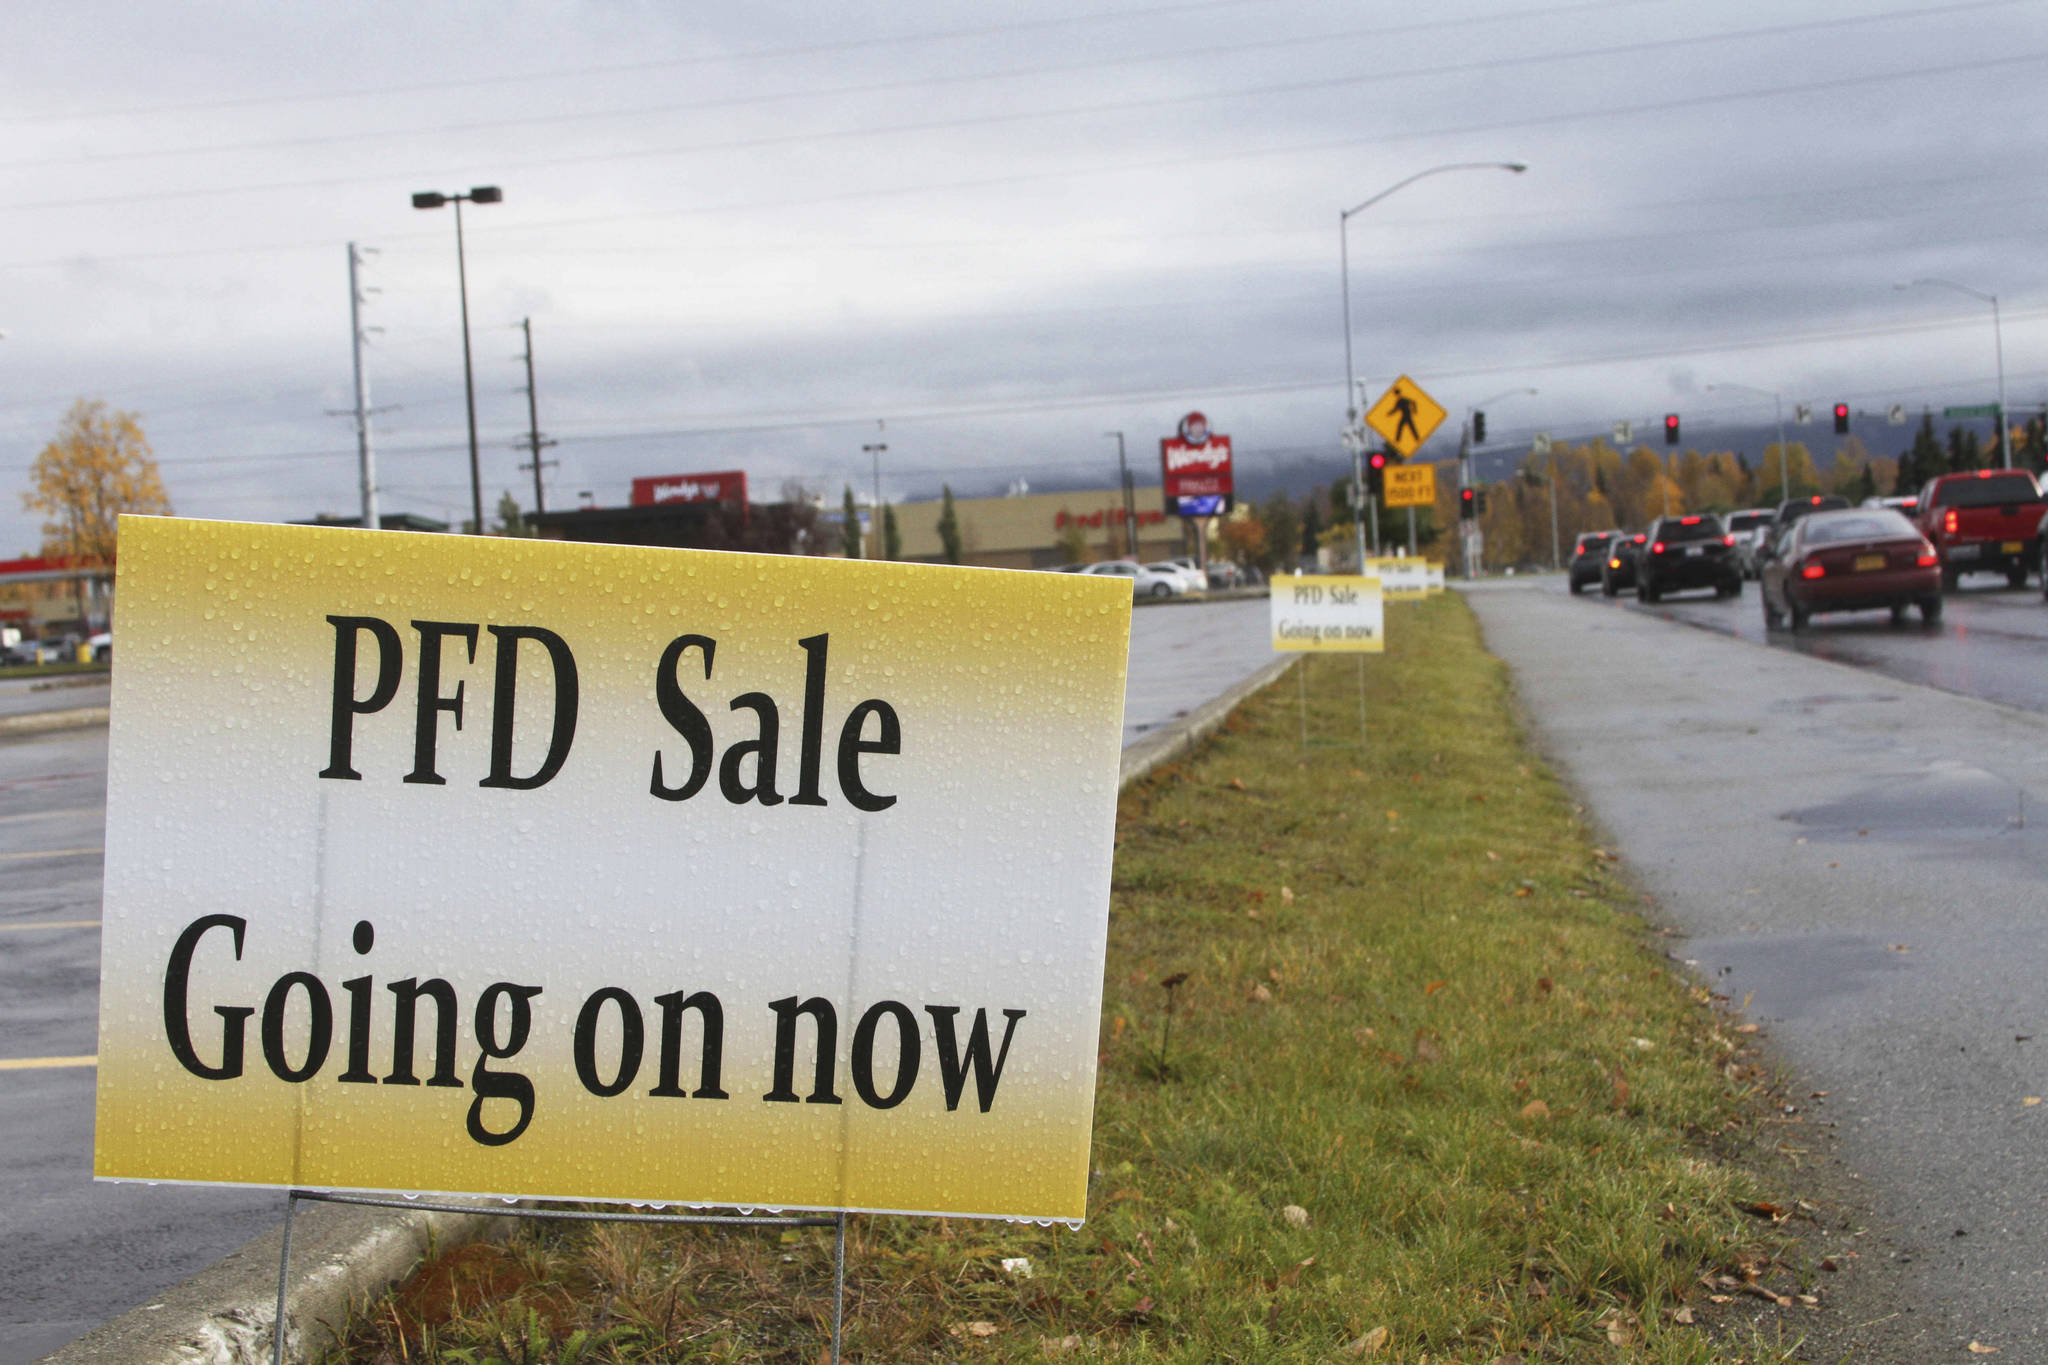 In this Oct. 4, 2017 file photo, a sign meant to entice recipients of payouts from the state’s Permanent Fund Dividend Division, also known as PFD, advertises a sale in Anchorage, Alaska. The Alaska Department of Revenue has shut down online applications for Alaska Permanent Fund dividends because of security concerns. The department in an announcement Tuesday, Jan. 1, 2019, said some applicants had inadvertently seen personal information belonging to other applicants who had filed previously. (AP Photo/Mark Thiessen, File)